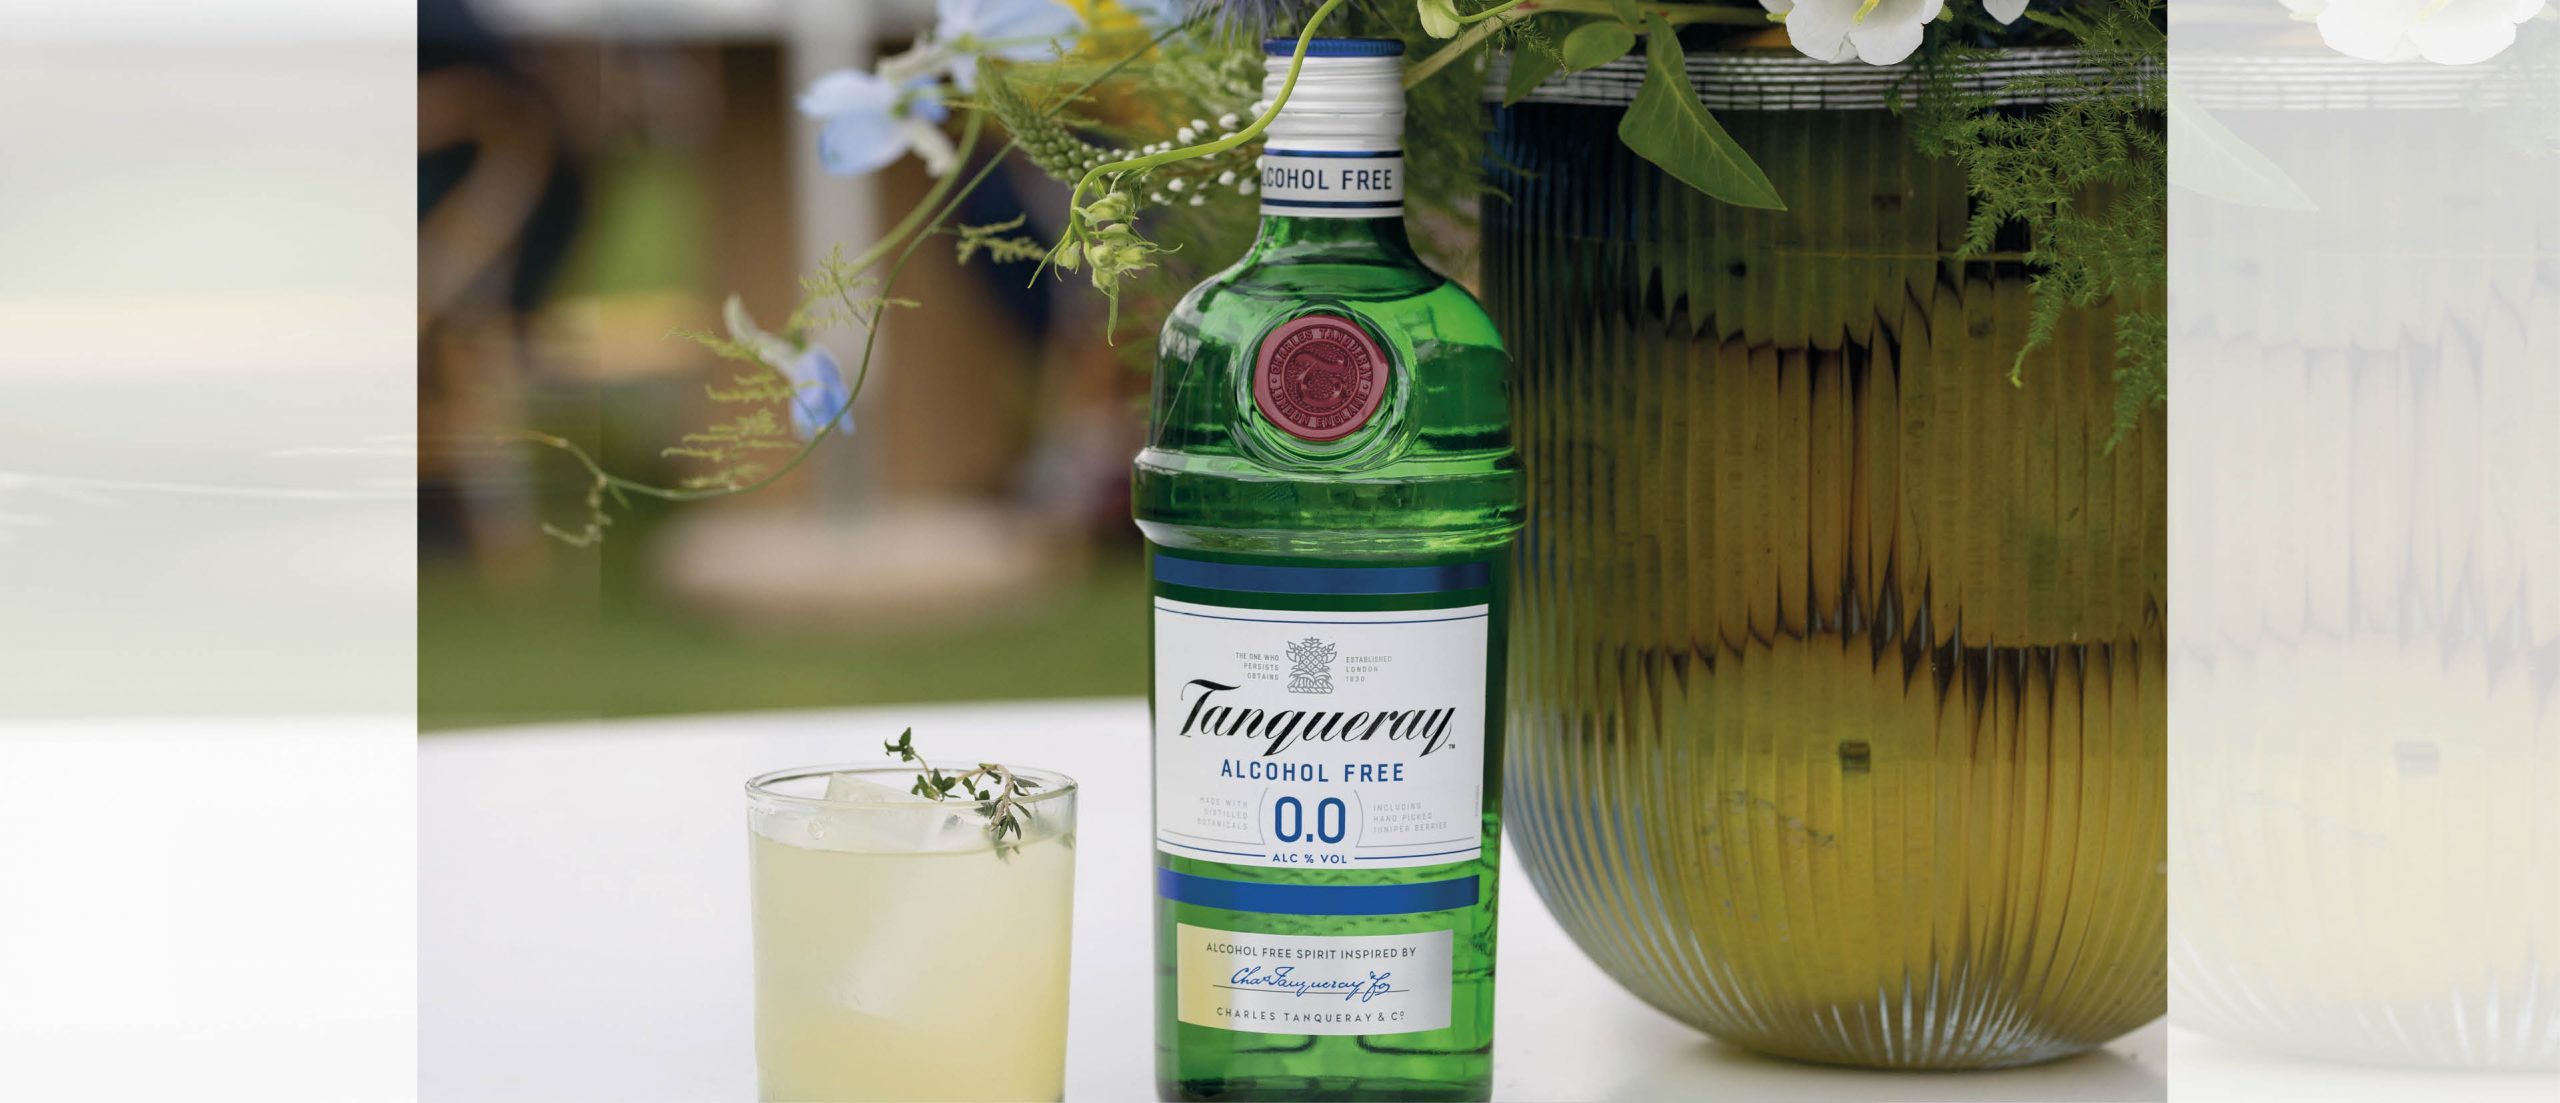 - Magazine Tanqueray Get alcohol-free Worry-free, It